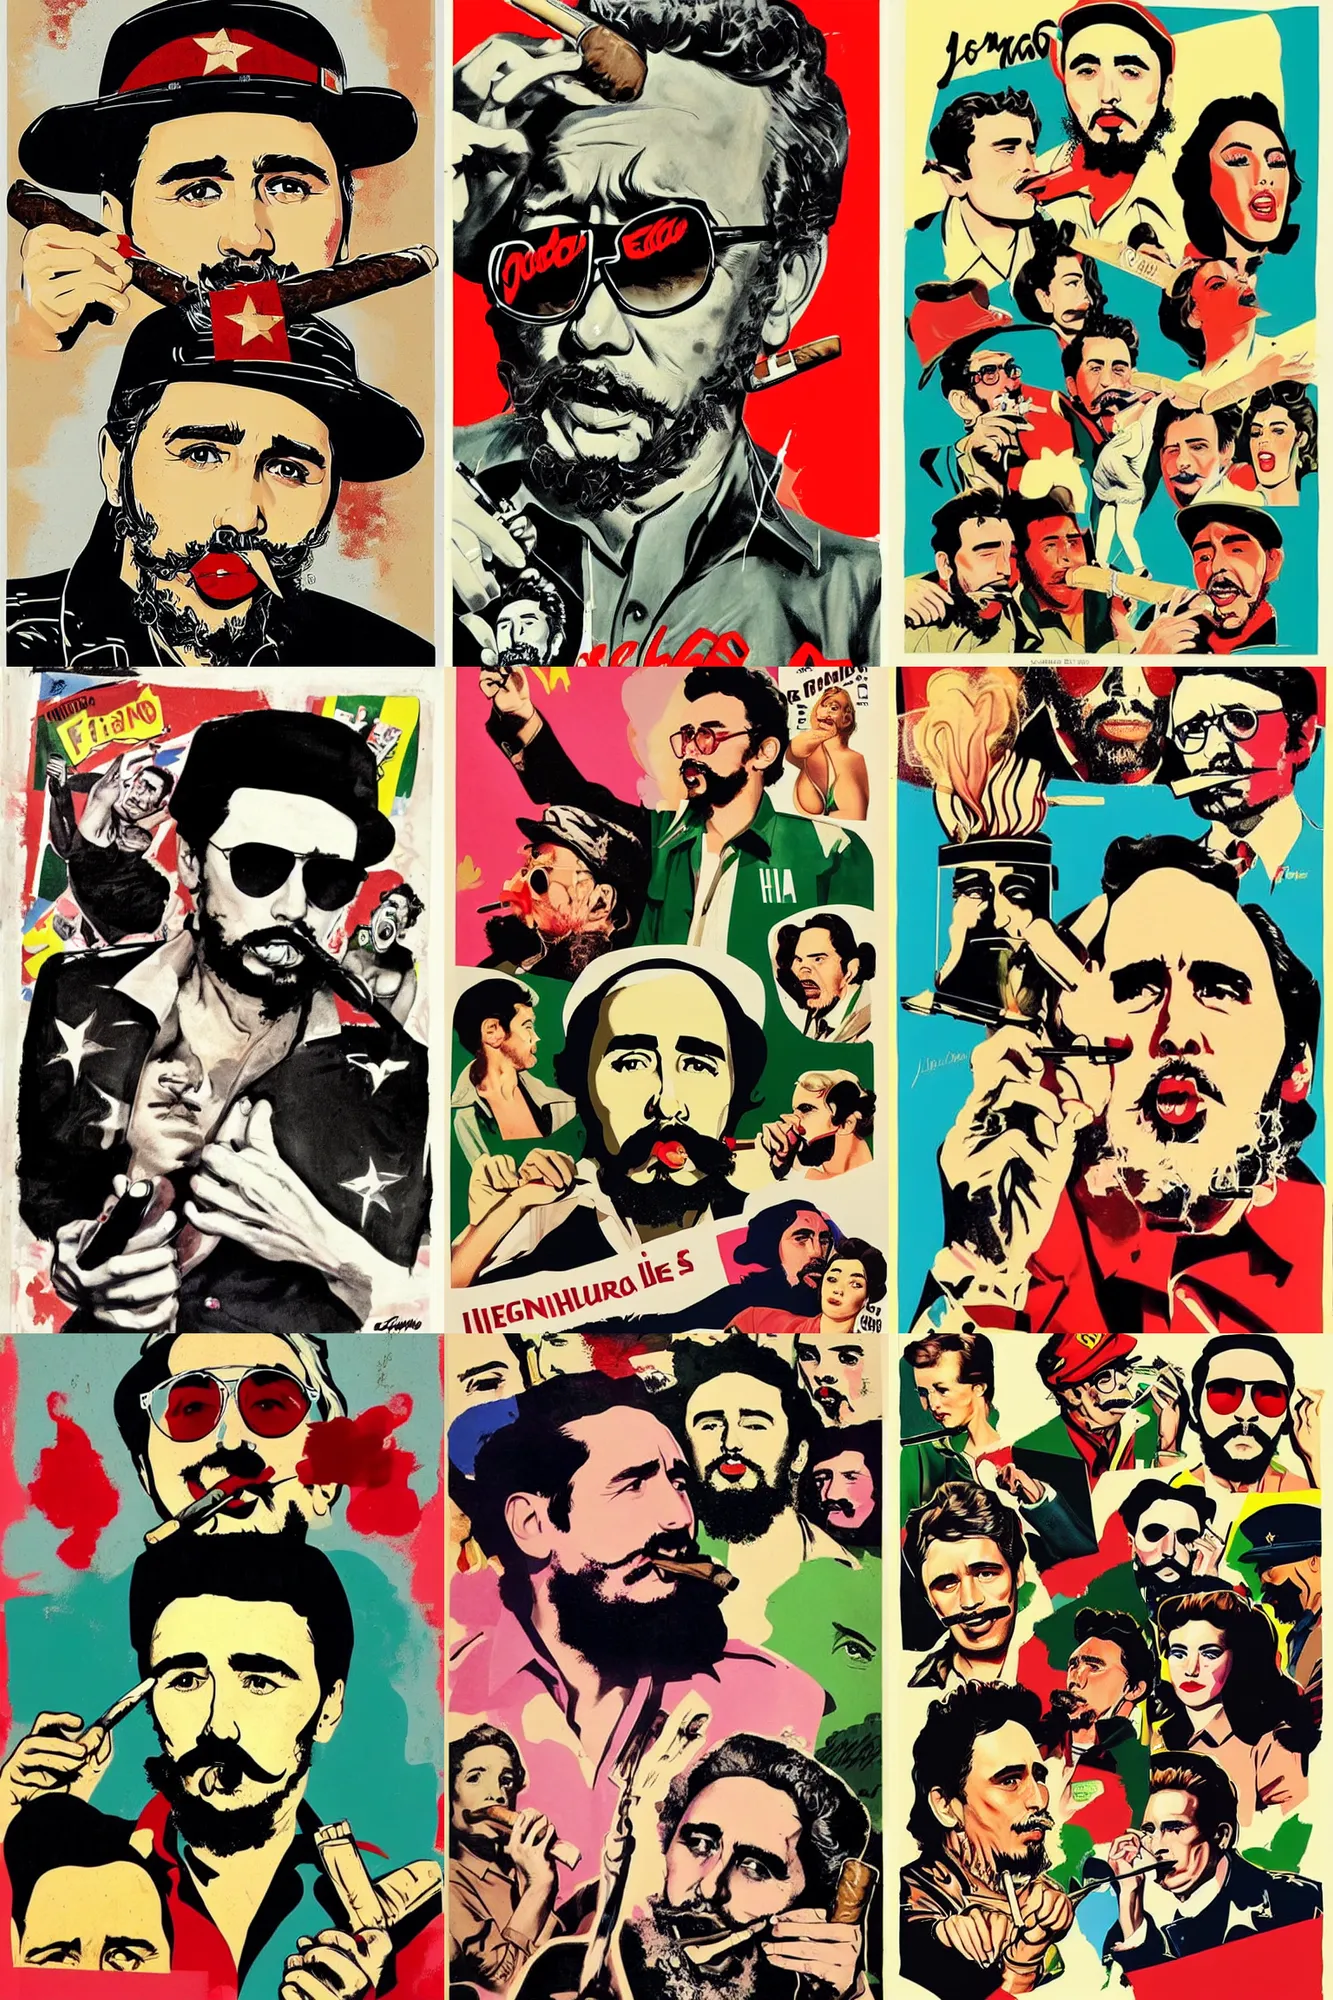 Prompt: james franco as the cuban dictator fidel castro smoking a large cigar, surrounded by voluptuous babes. pop art aesthetic, andy warhol, mad magazine aesthetic, tom richmond illustration, mort drucker illustration